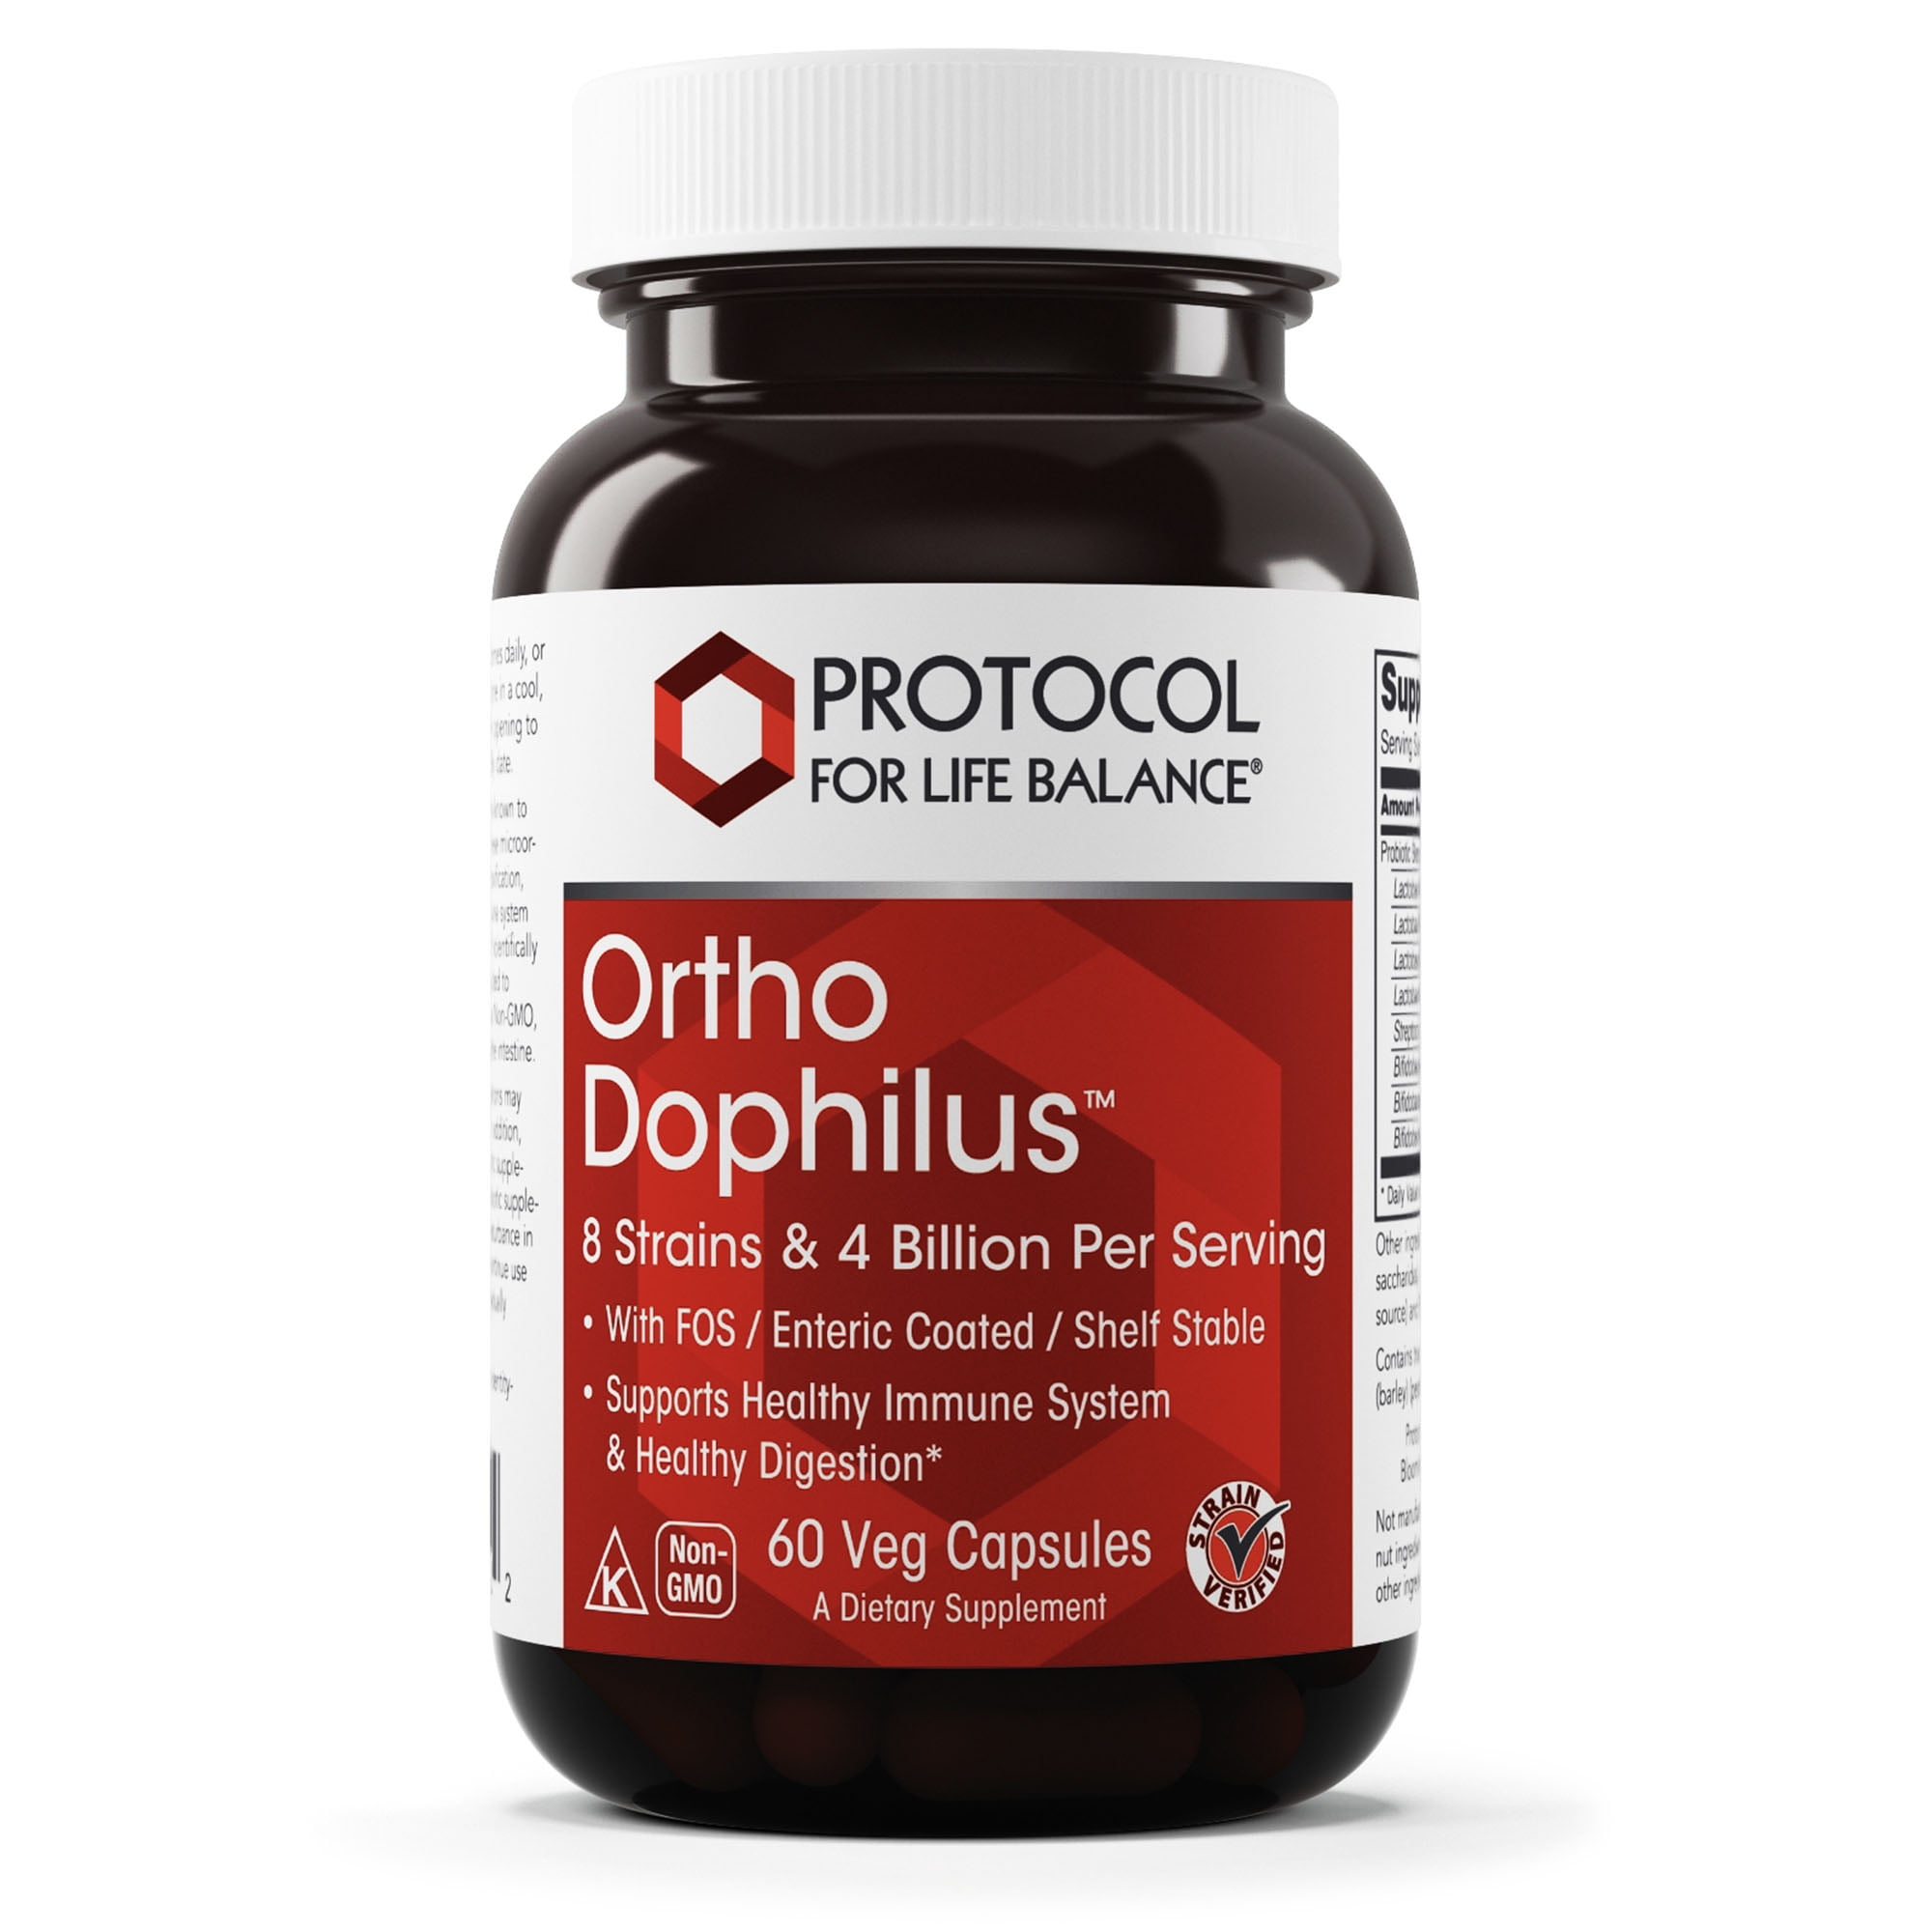 Protocol For Life Balance - Ortho Dophilus - Supports Healthy Immune System, Regular Bowel Movement, Weight Control, Fatigue, and Healthy Bacteria (Shelf Stable Probiotic) - 60 Veg Capsules